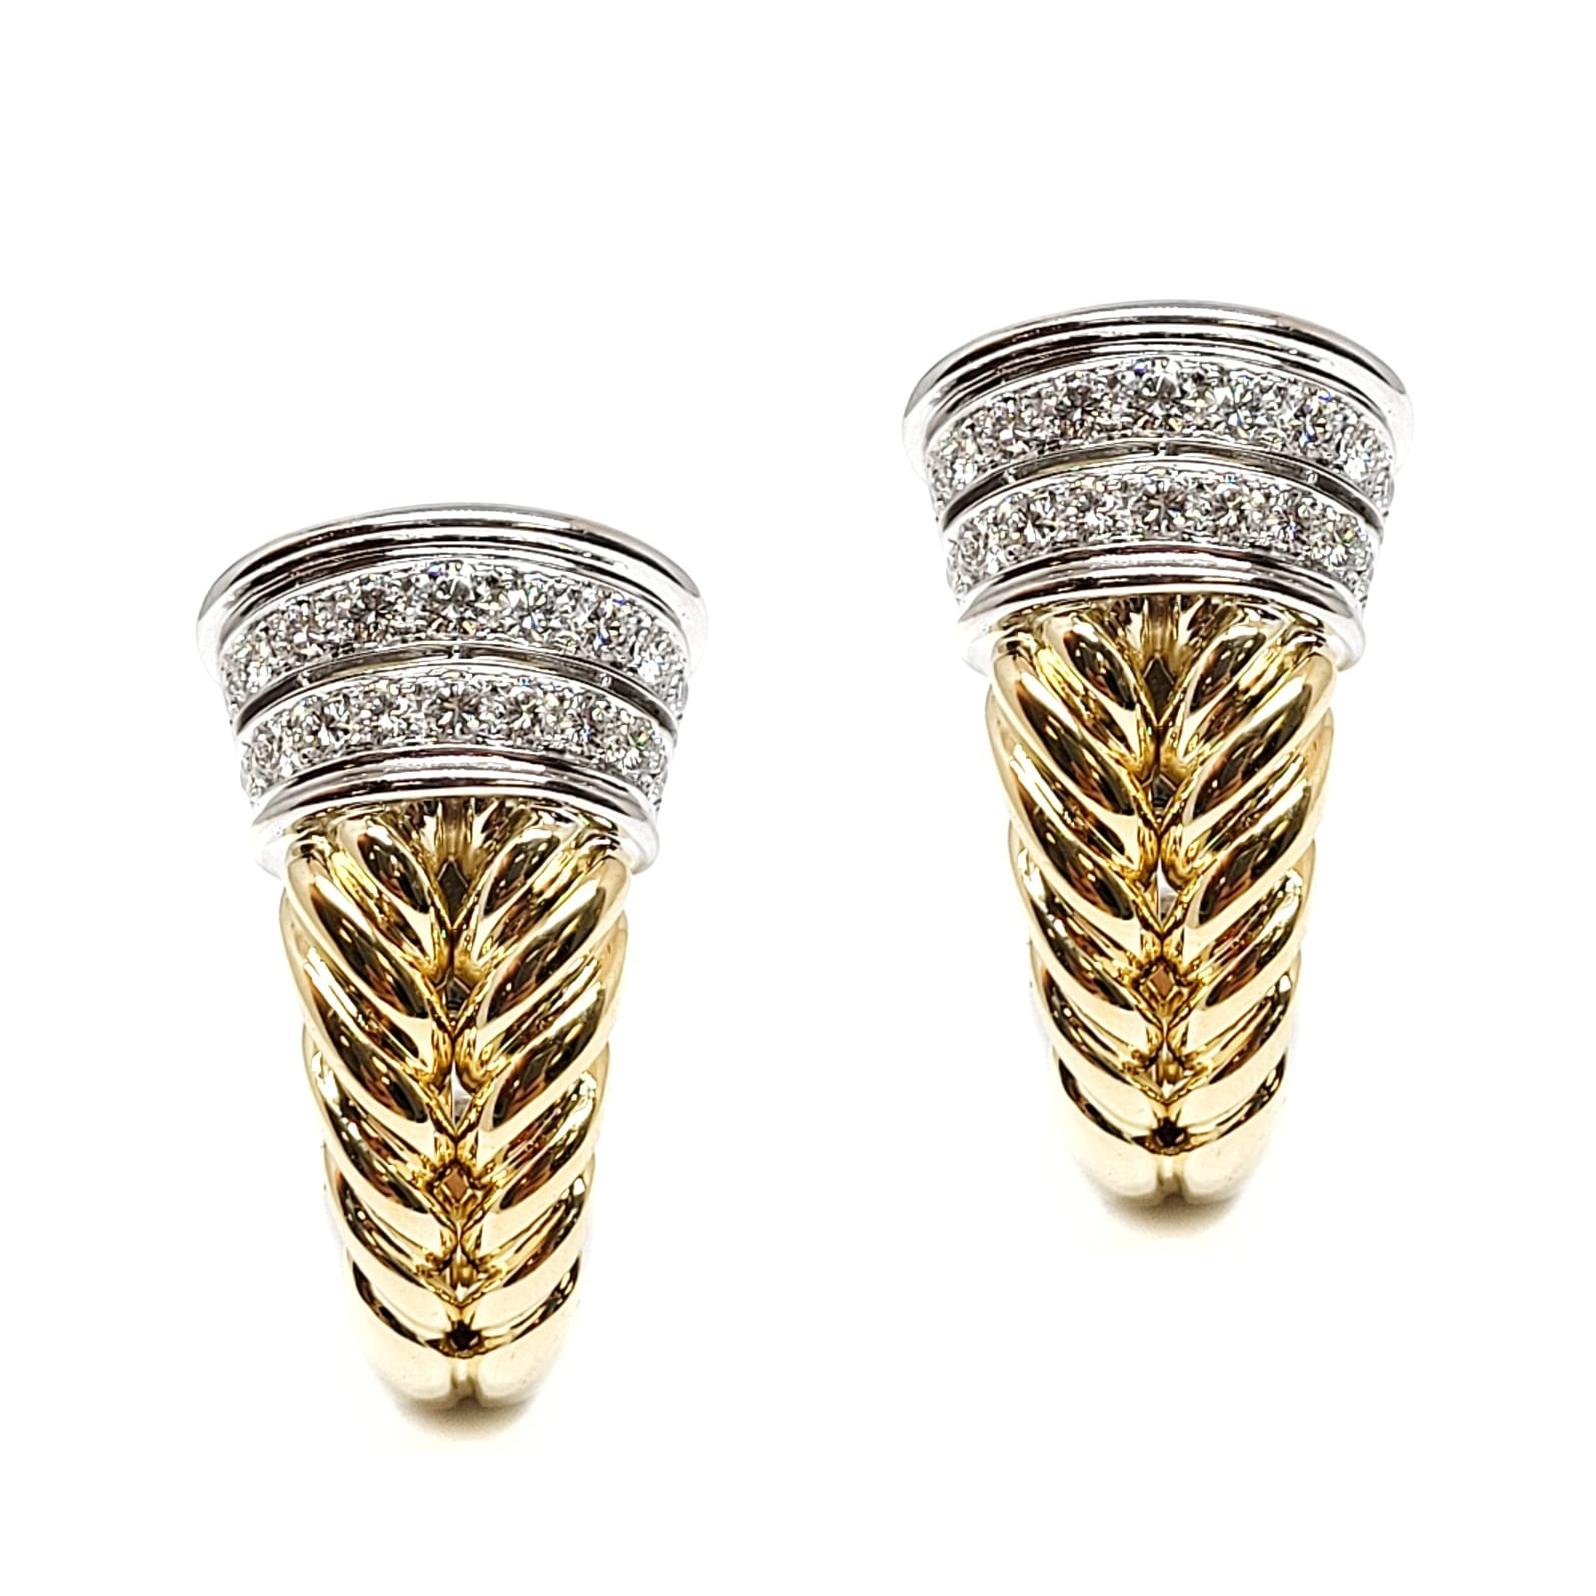 Contemporary Andreoli 2.00 Carat Diamond 18 Karat Two-Tone Gold Earrings For Sale